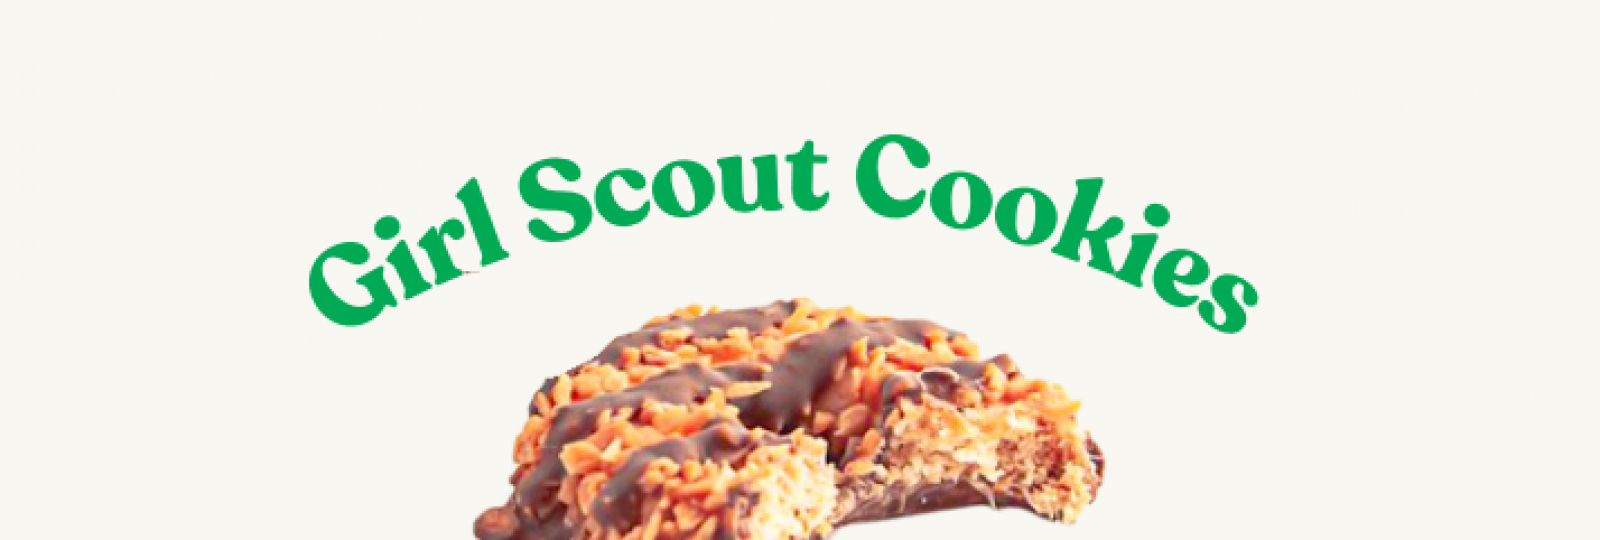 Girl Scout Cookie Review Graphic... Maybe